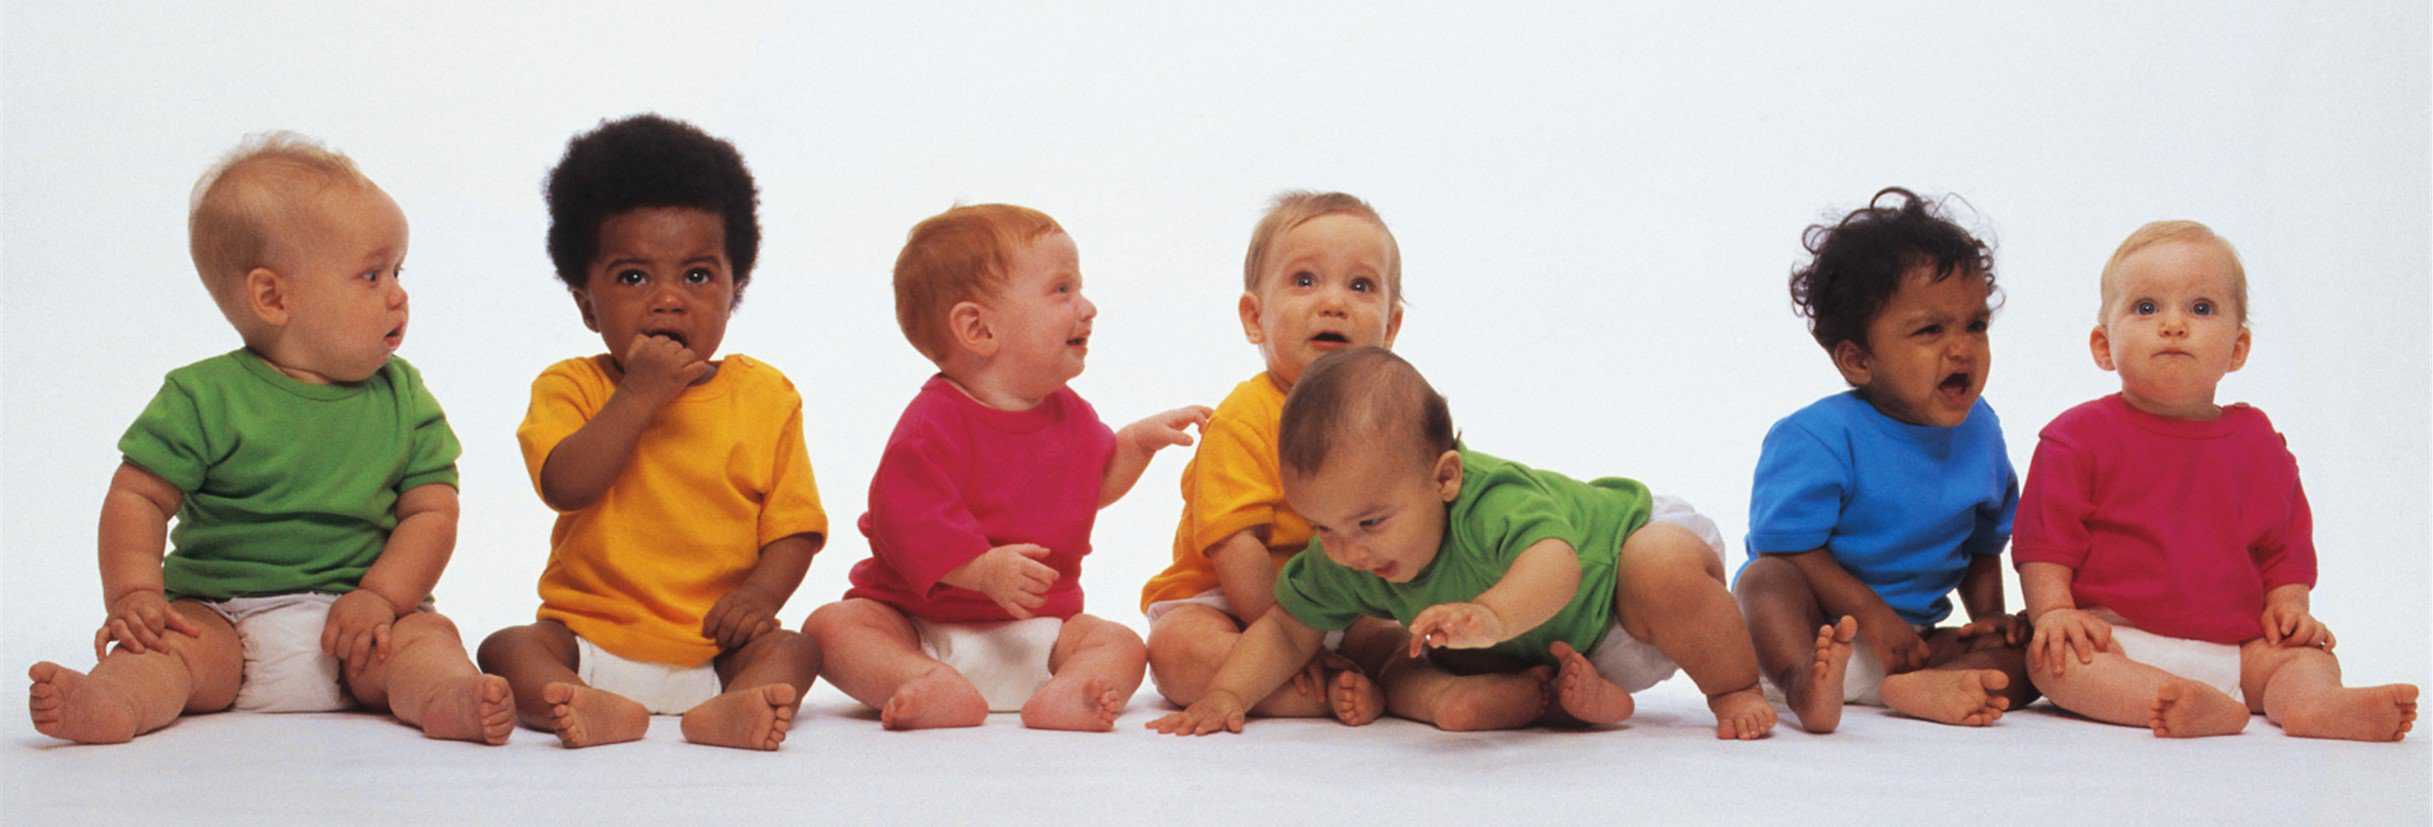 Group of babies sitting beside each other, national injury prevention day, baby safety shower, safety tips for parents, prevention of injury in babies, injury prevention